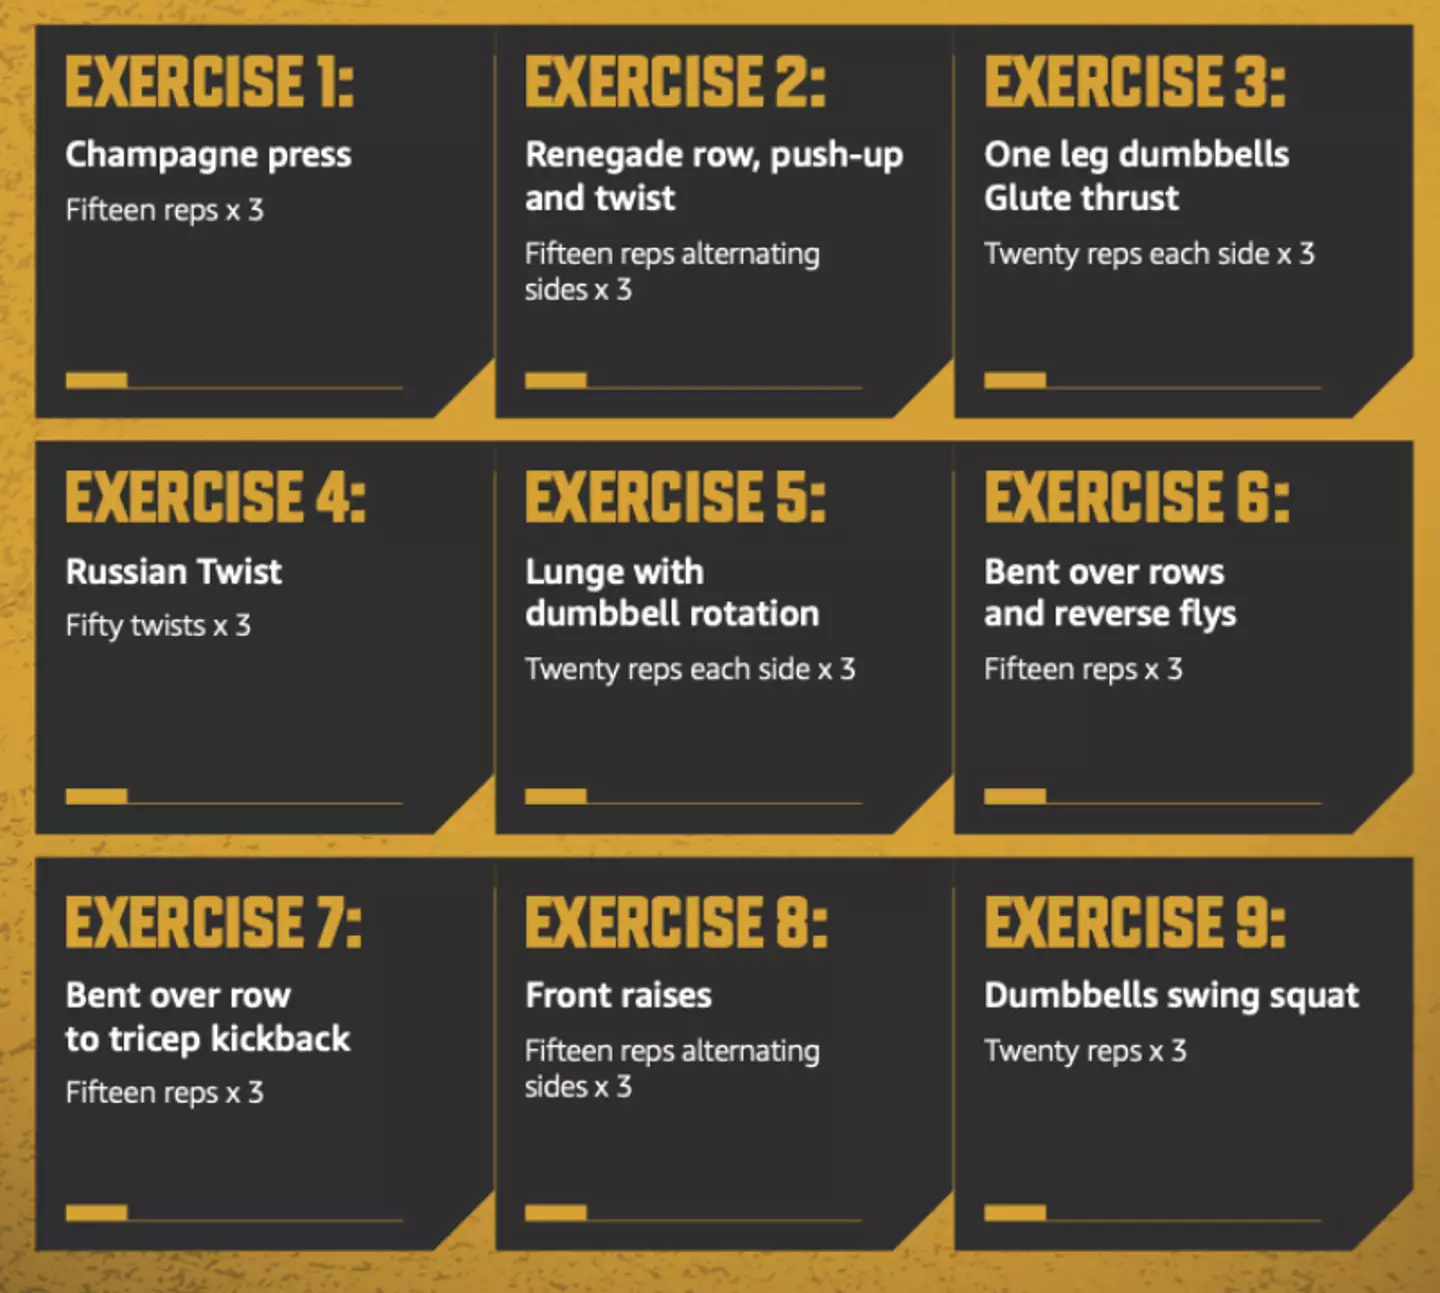 Jack Reacher's workout has been created by Buster Reeves.